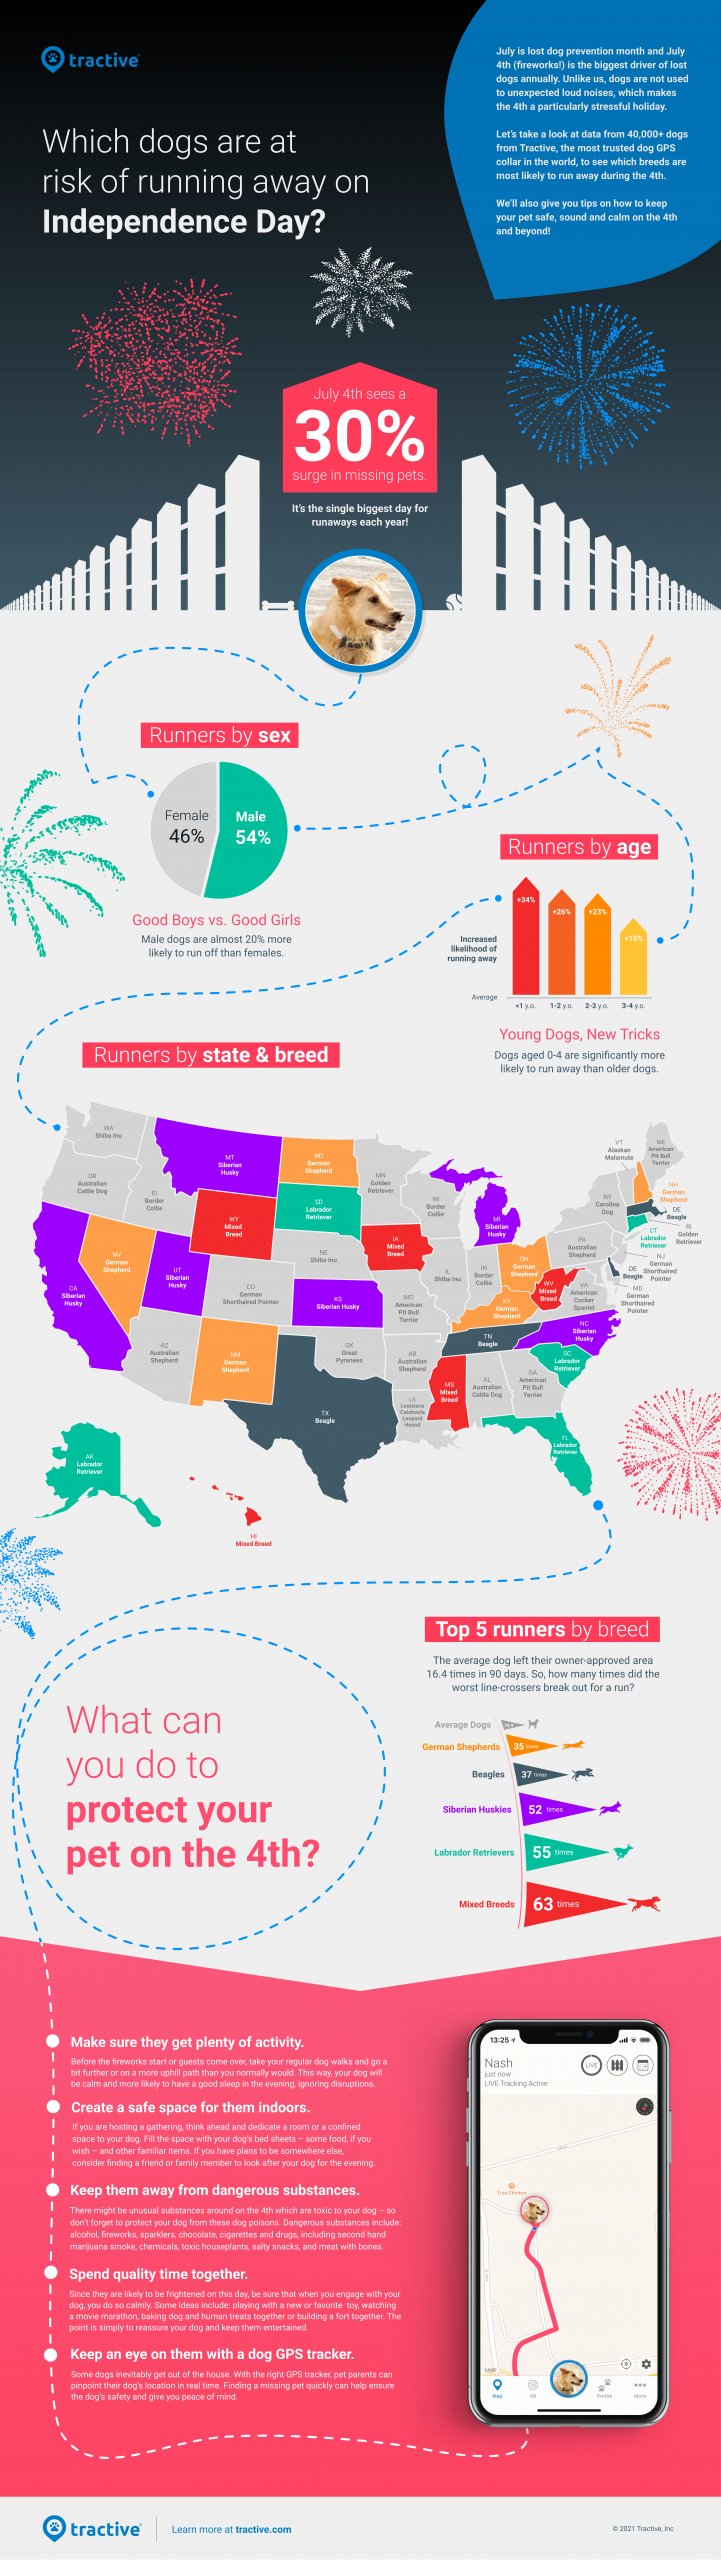 Tractive dog on 4th of July missing infographic